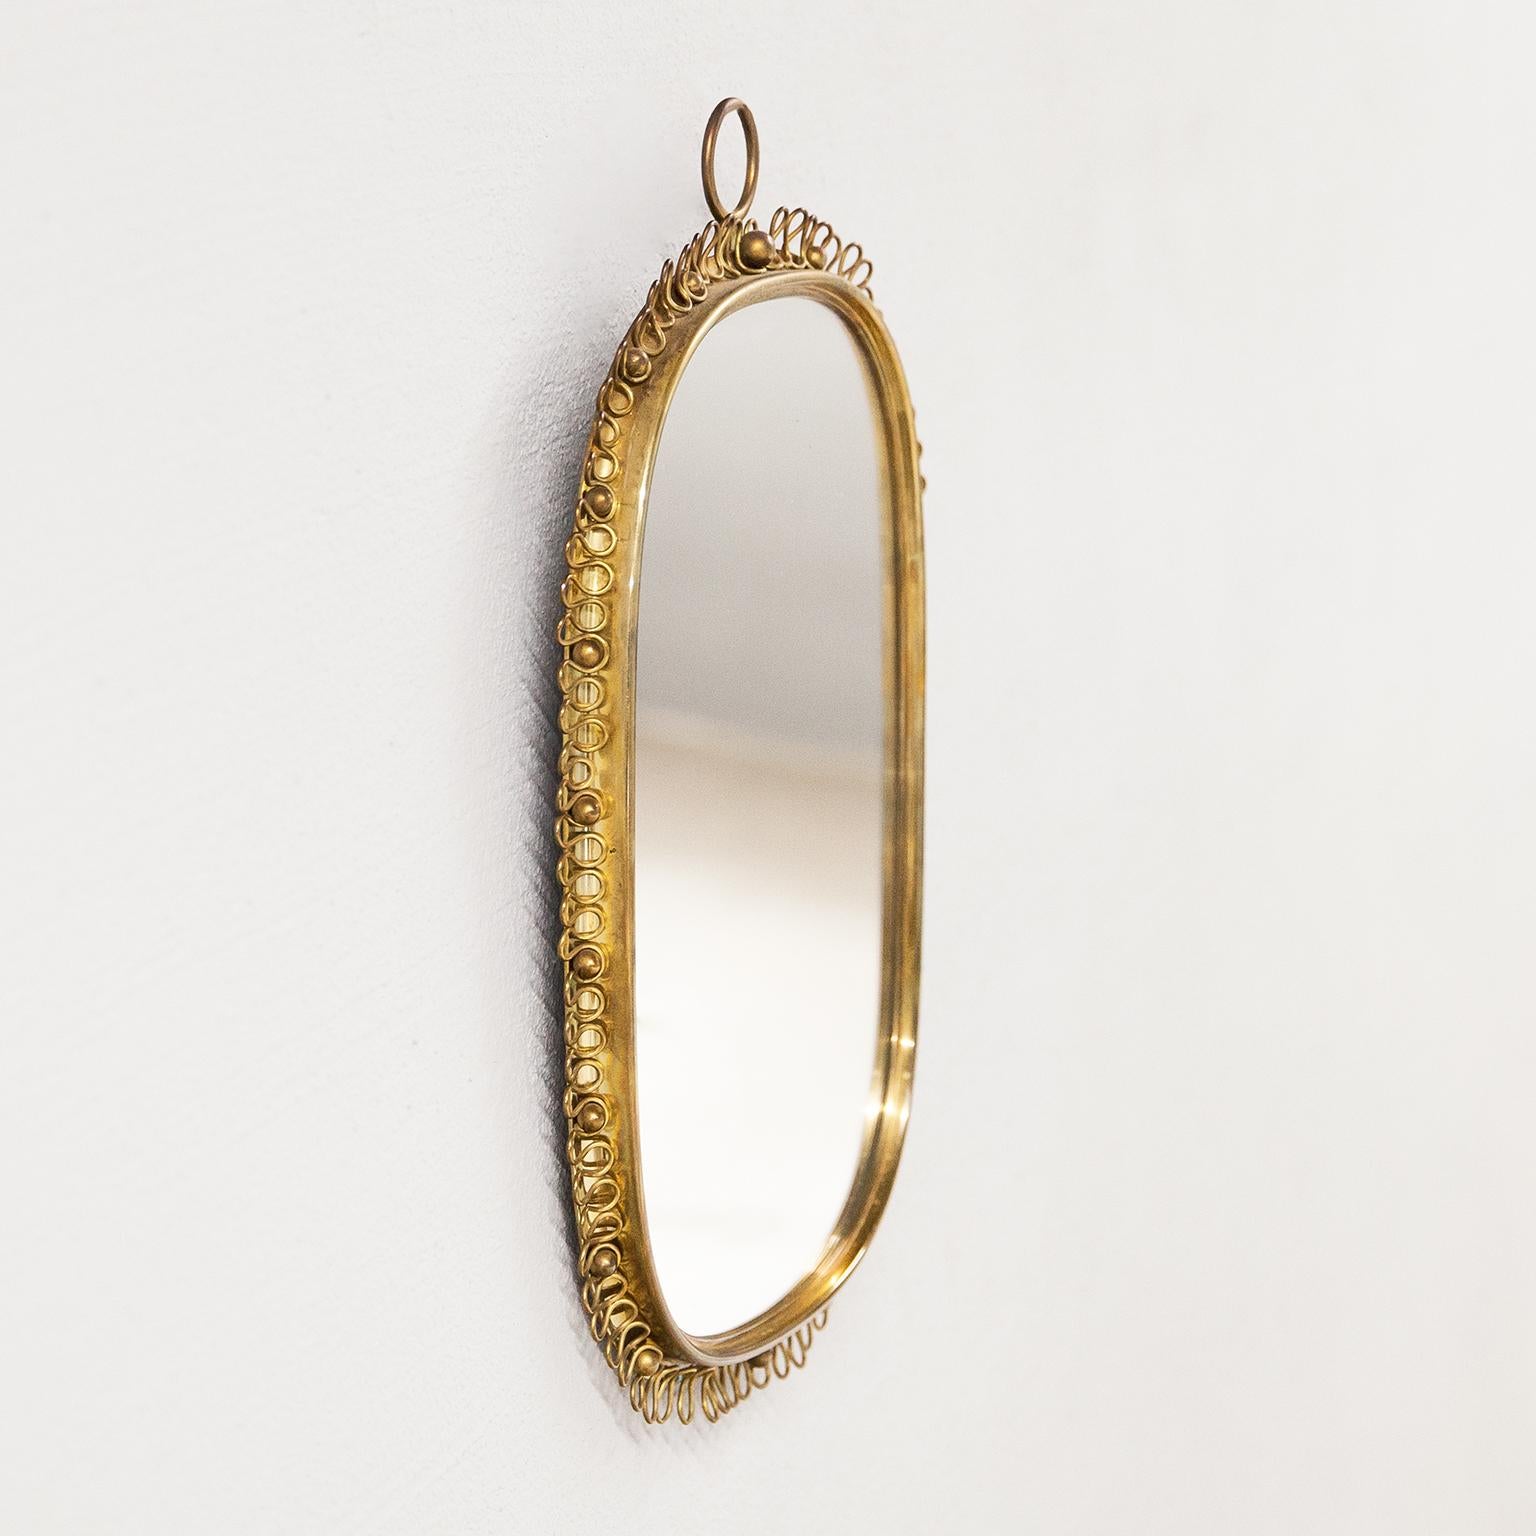 A beautiful mirror with a nice oval brass frame and a decorative brass ring from the 1950s. Designed by Josef Frank for Svenskt Tenn, Sweden.